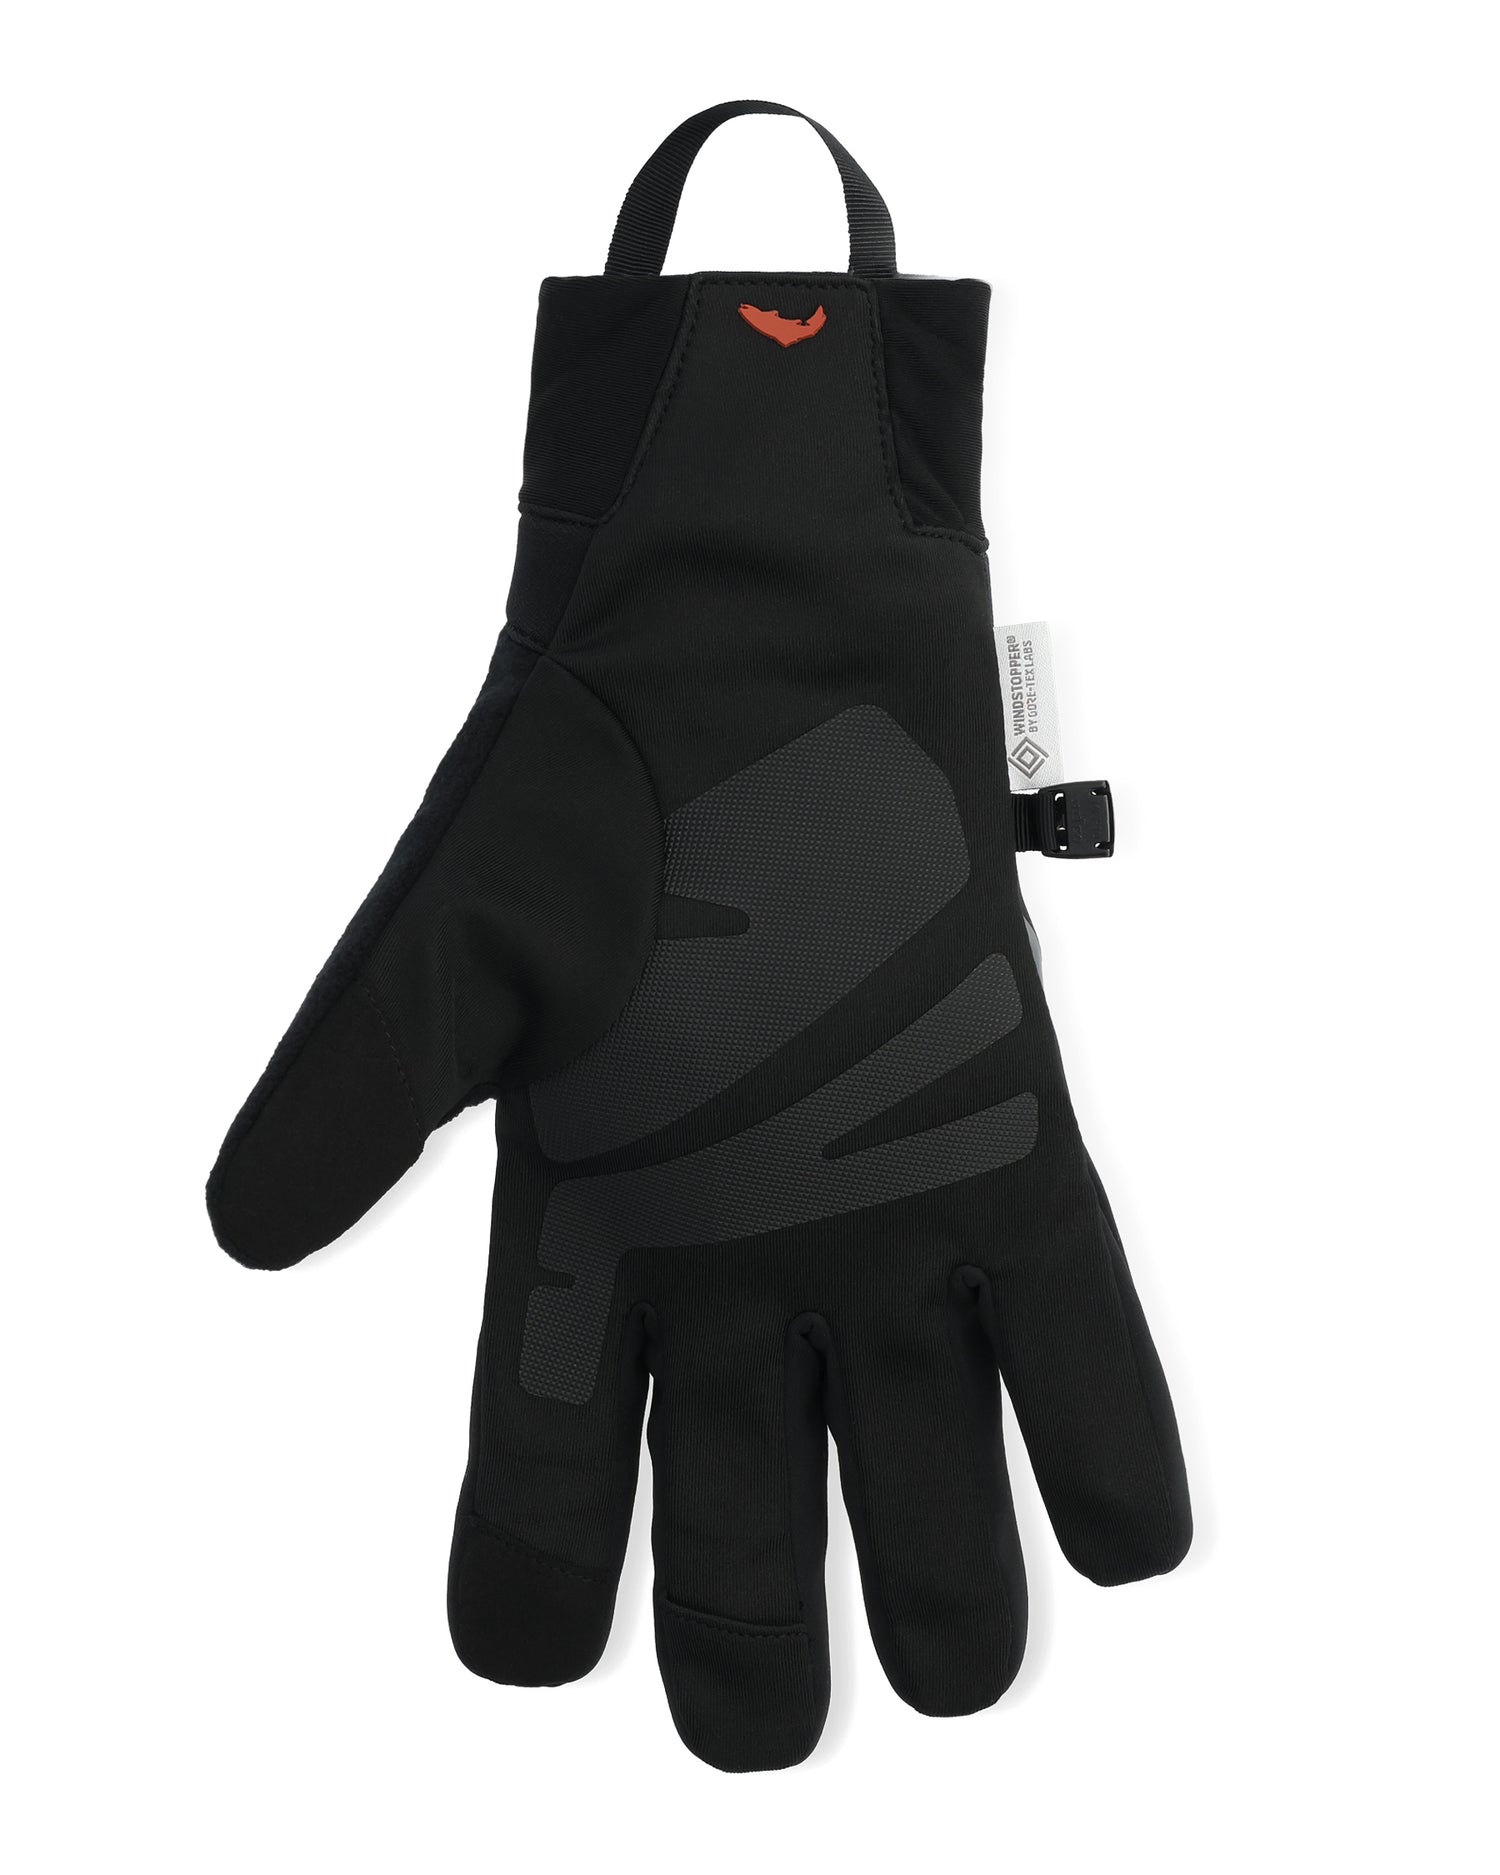 WINDSTOPPER® Flex Fishing Glove | Simms Fishing Products